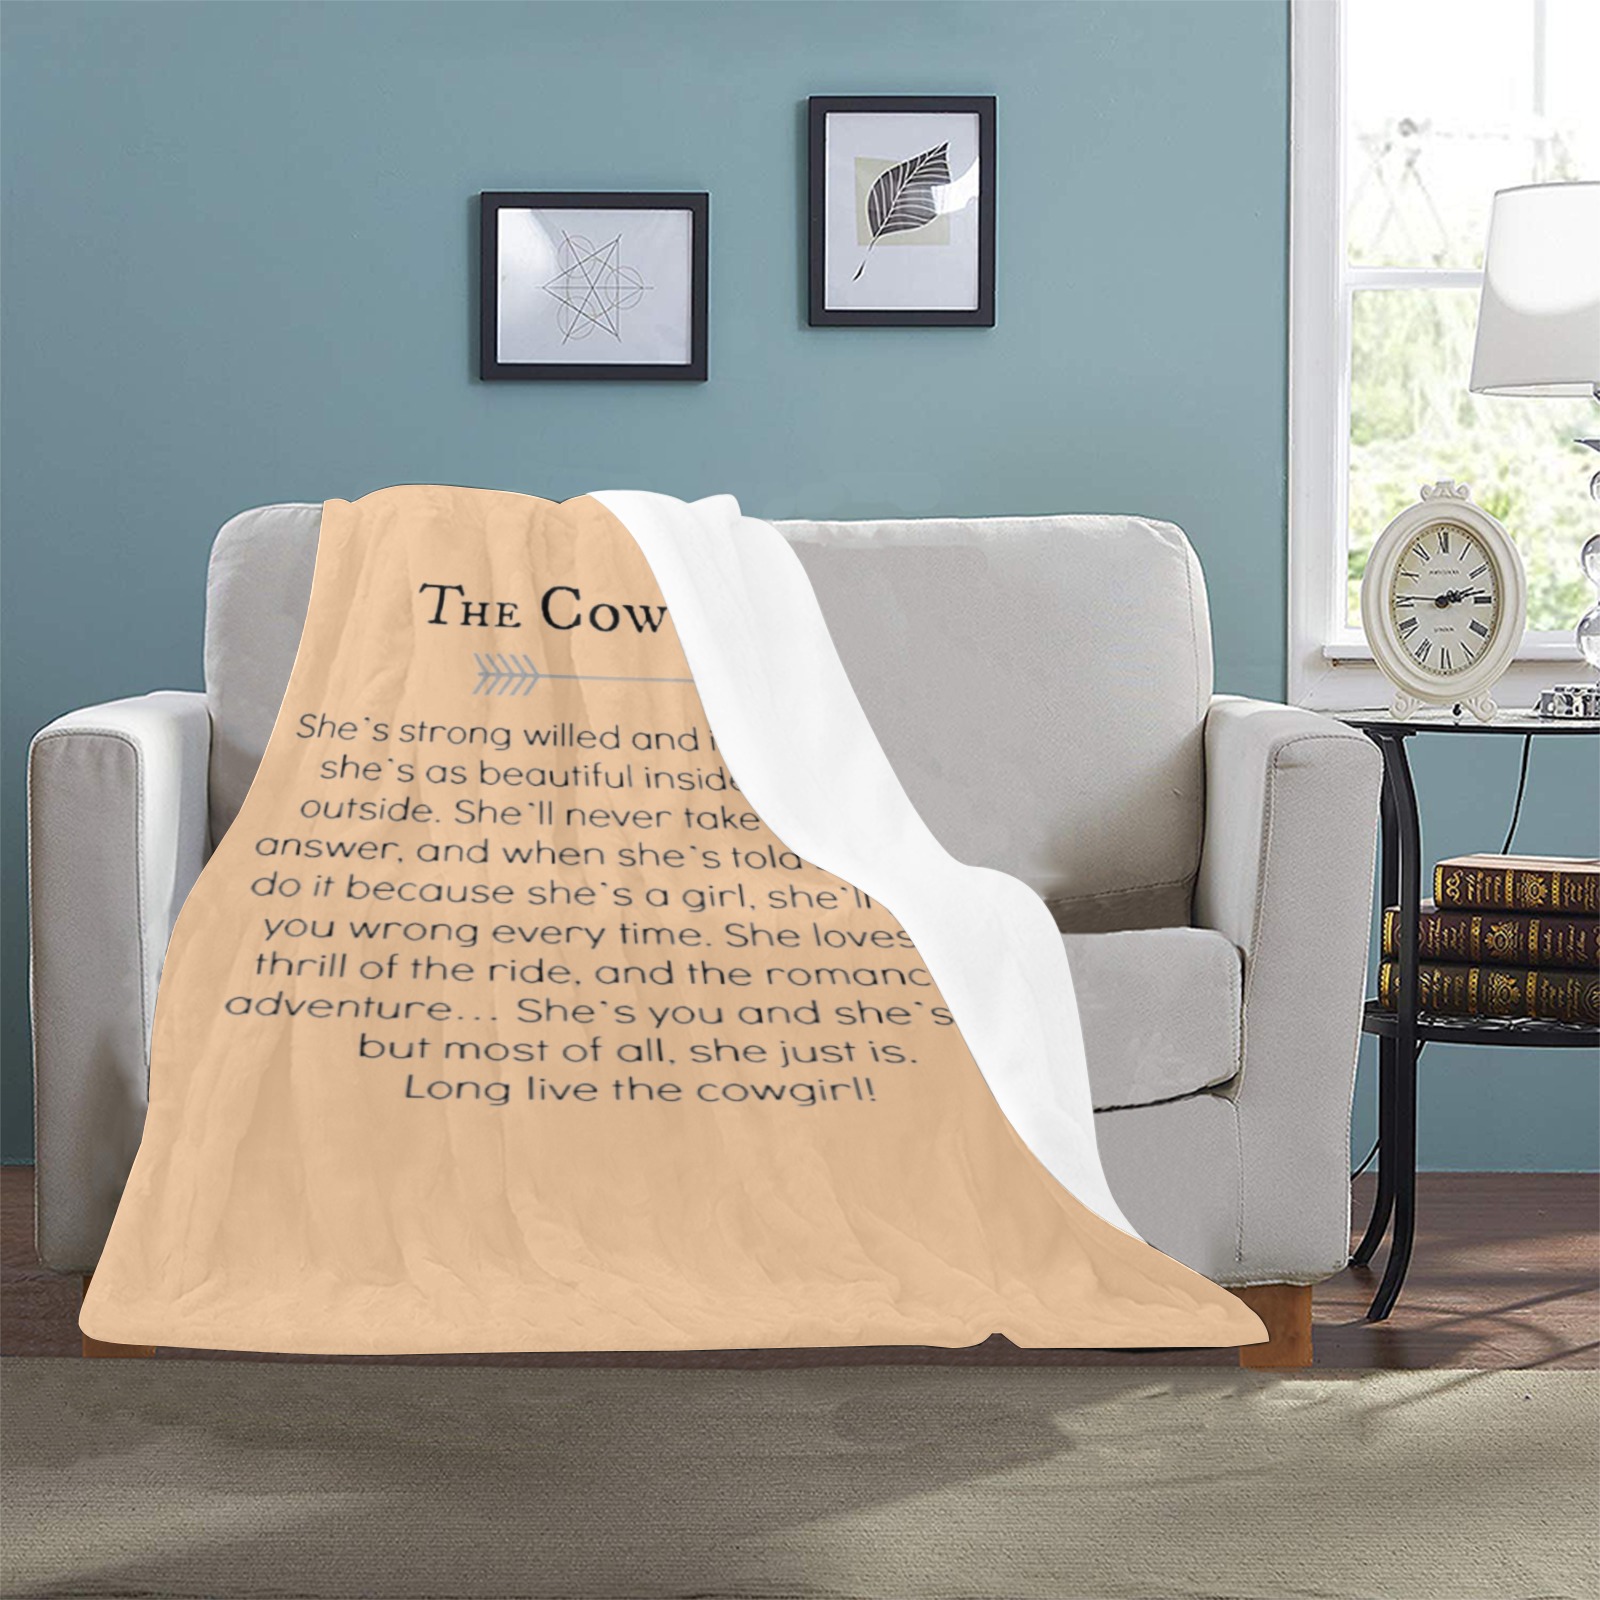 TheCowgirl-poem Ultra-Soft Micro Fleece Blanket 32"x48"